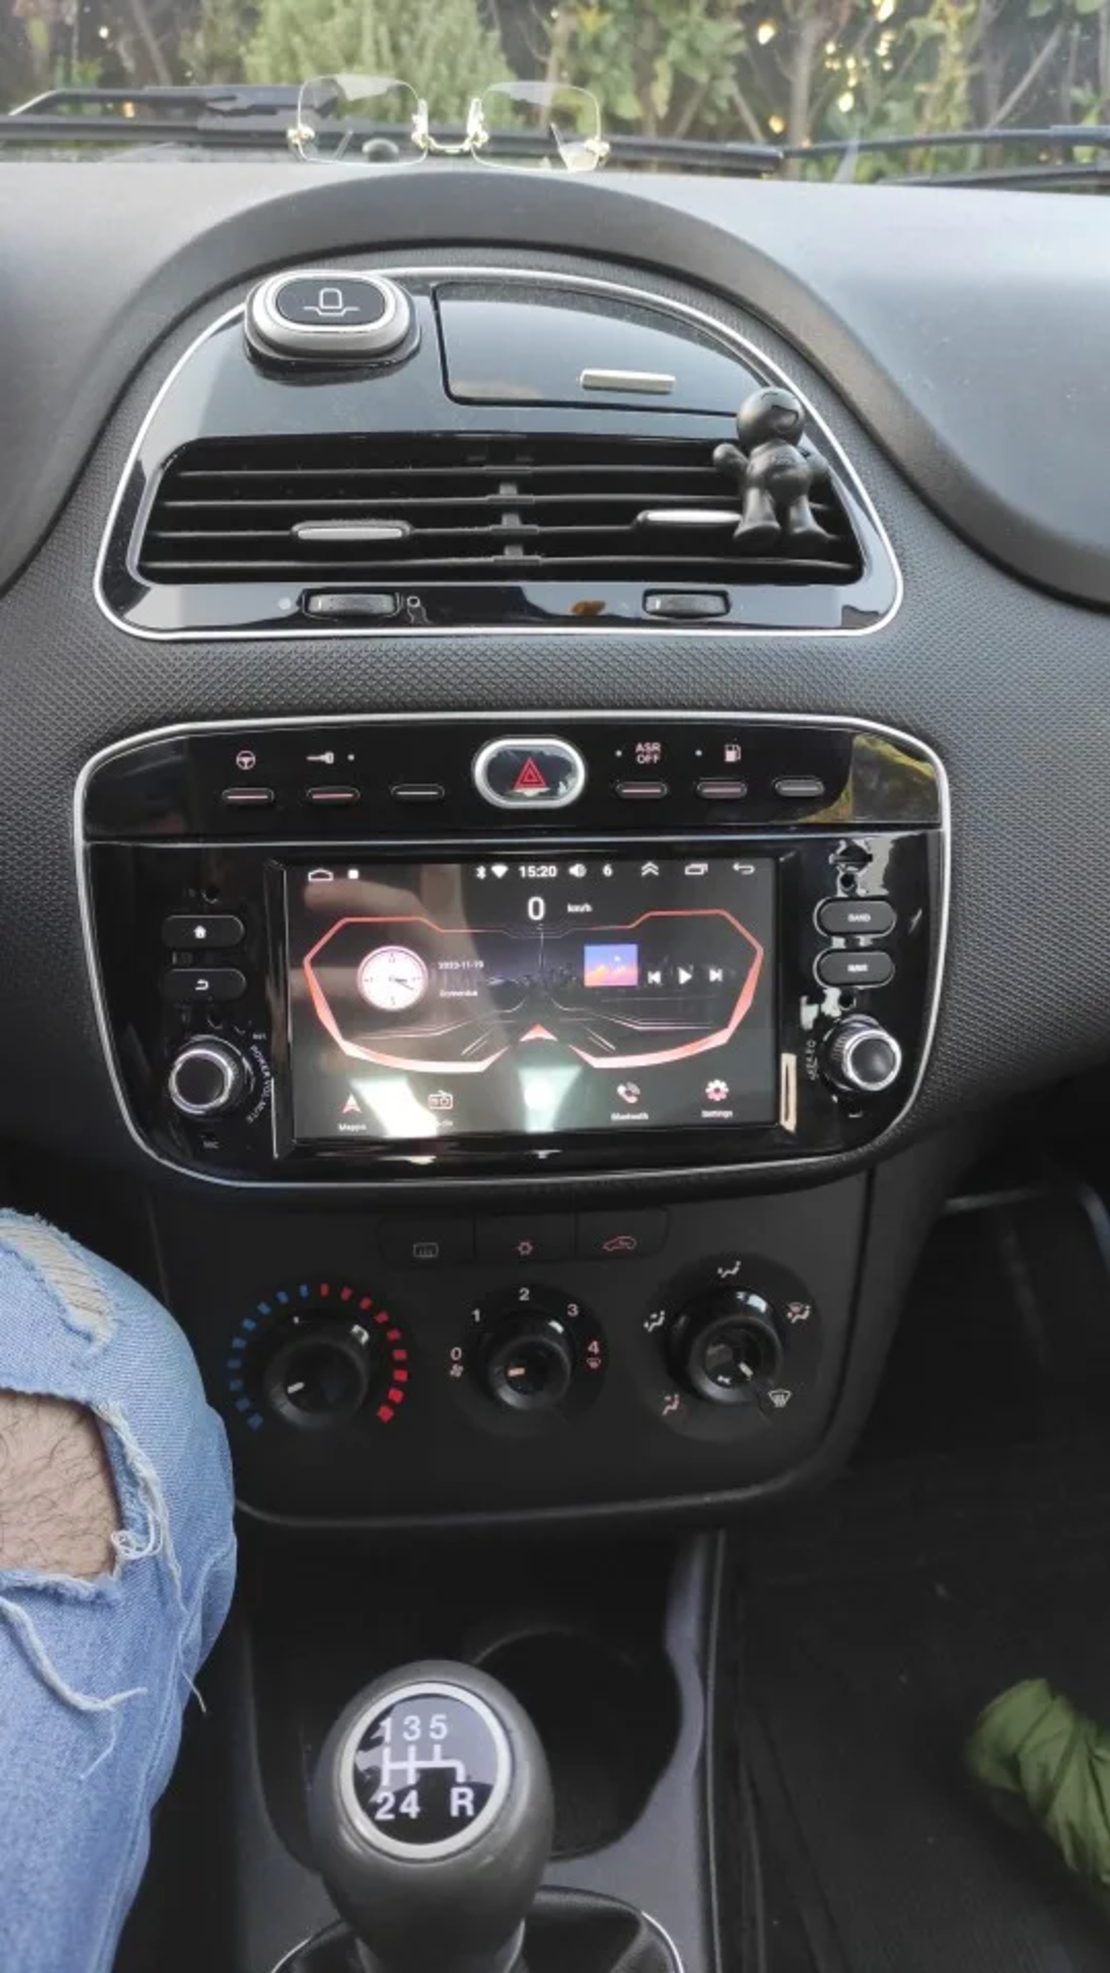 Fiat Punto, Linea 2012- 2016, Android Mултимедия/Навигация